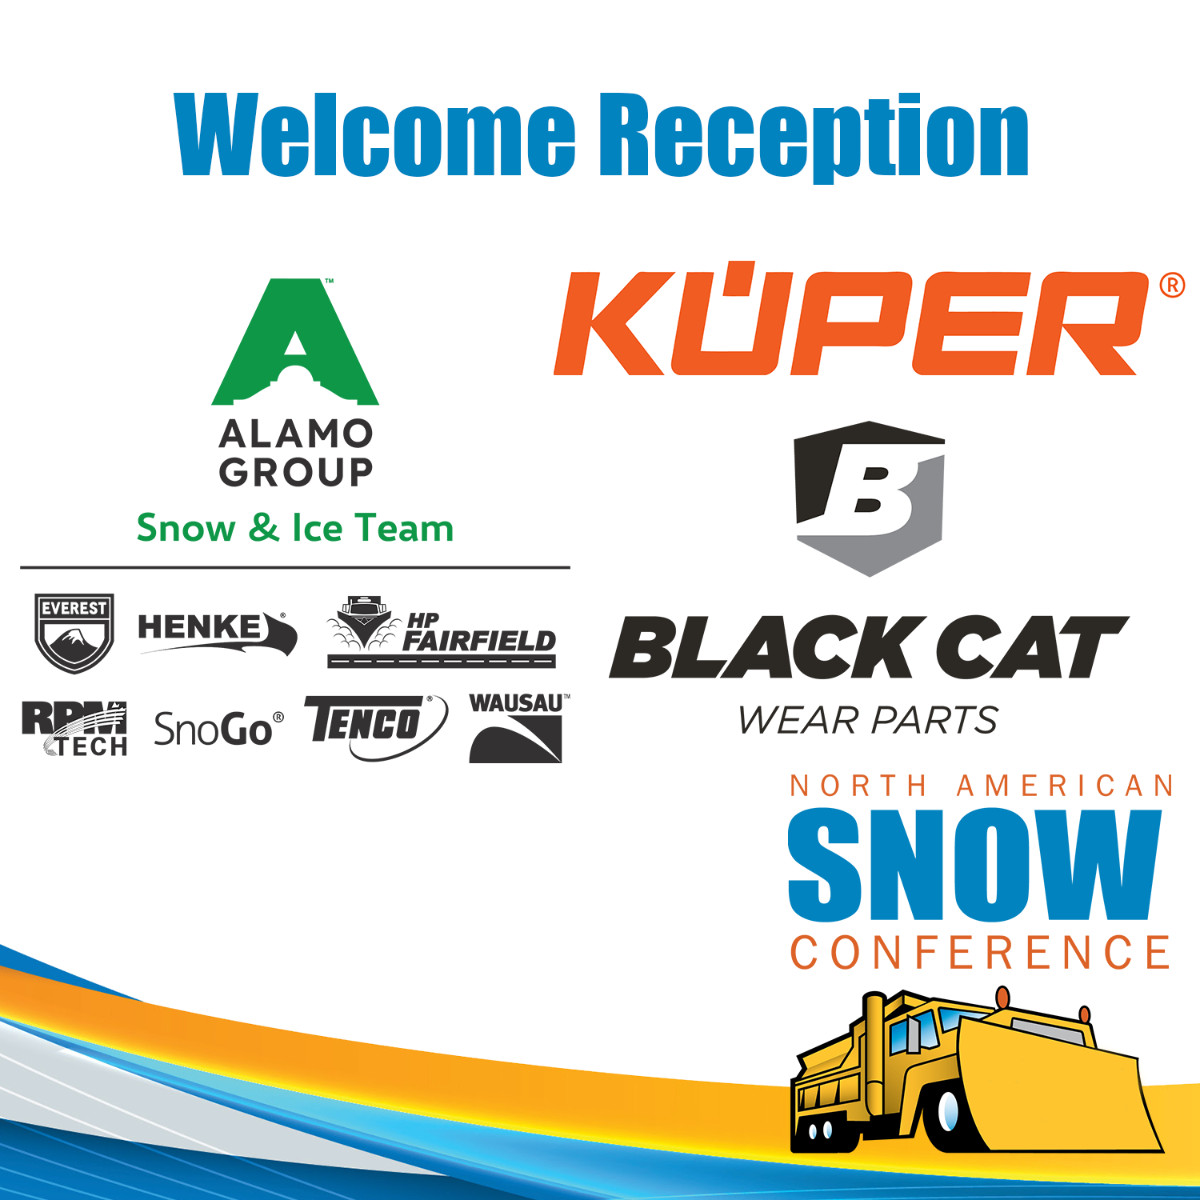 #sponsored | The exhibit floor welcome reception is now open! Thank our great sponsors the Alamo Group (booth #1025), @black_cat_wear (booth #705), and Kueper (booth #643) for the drinks!